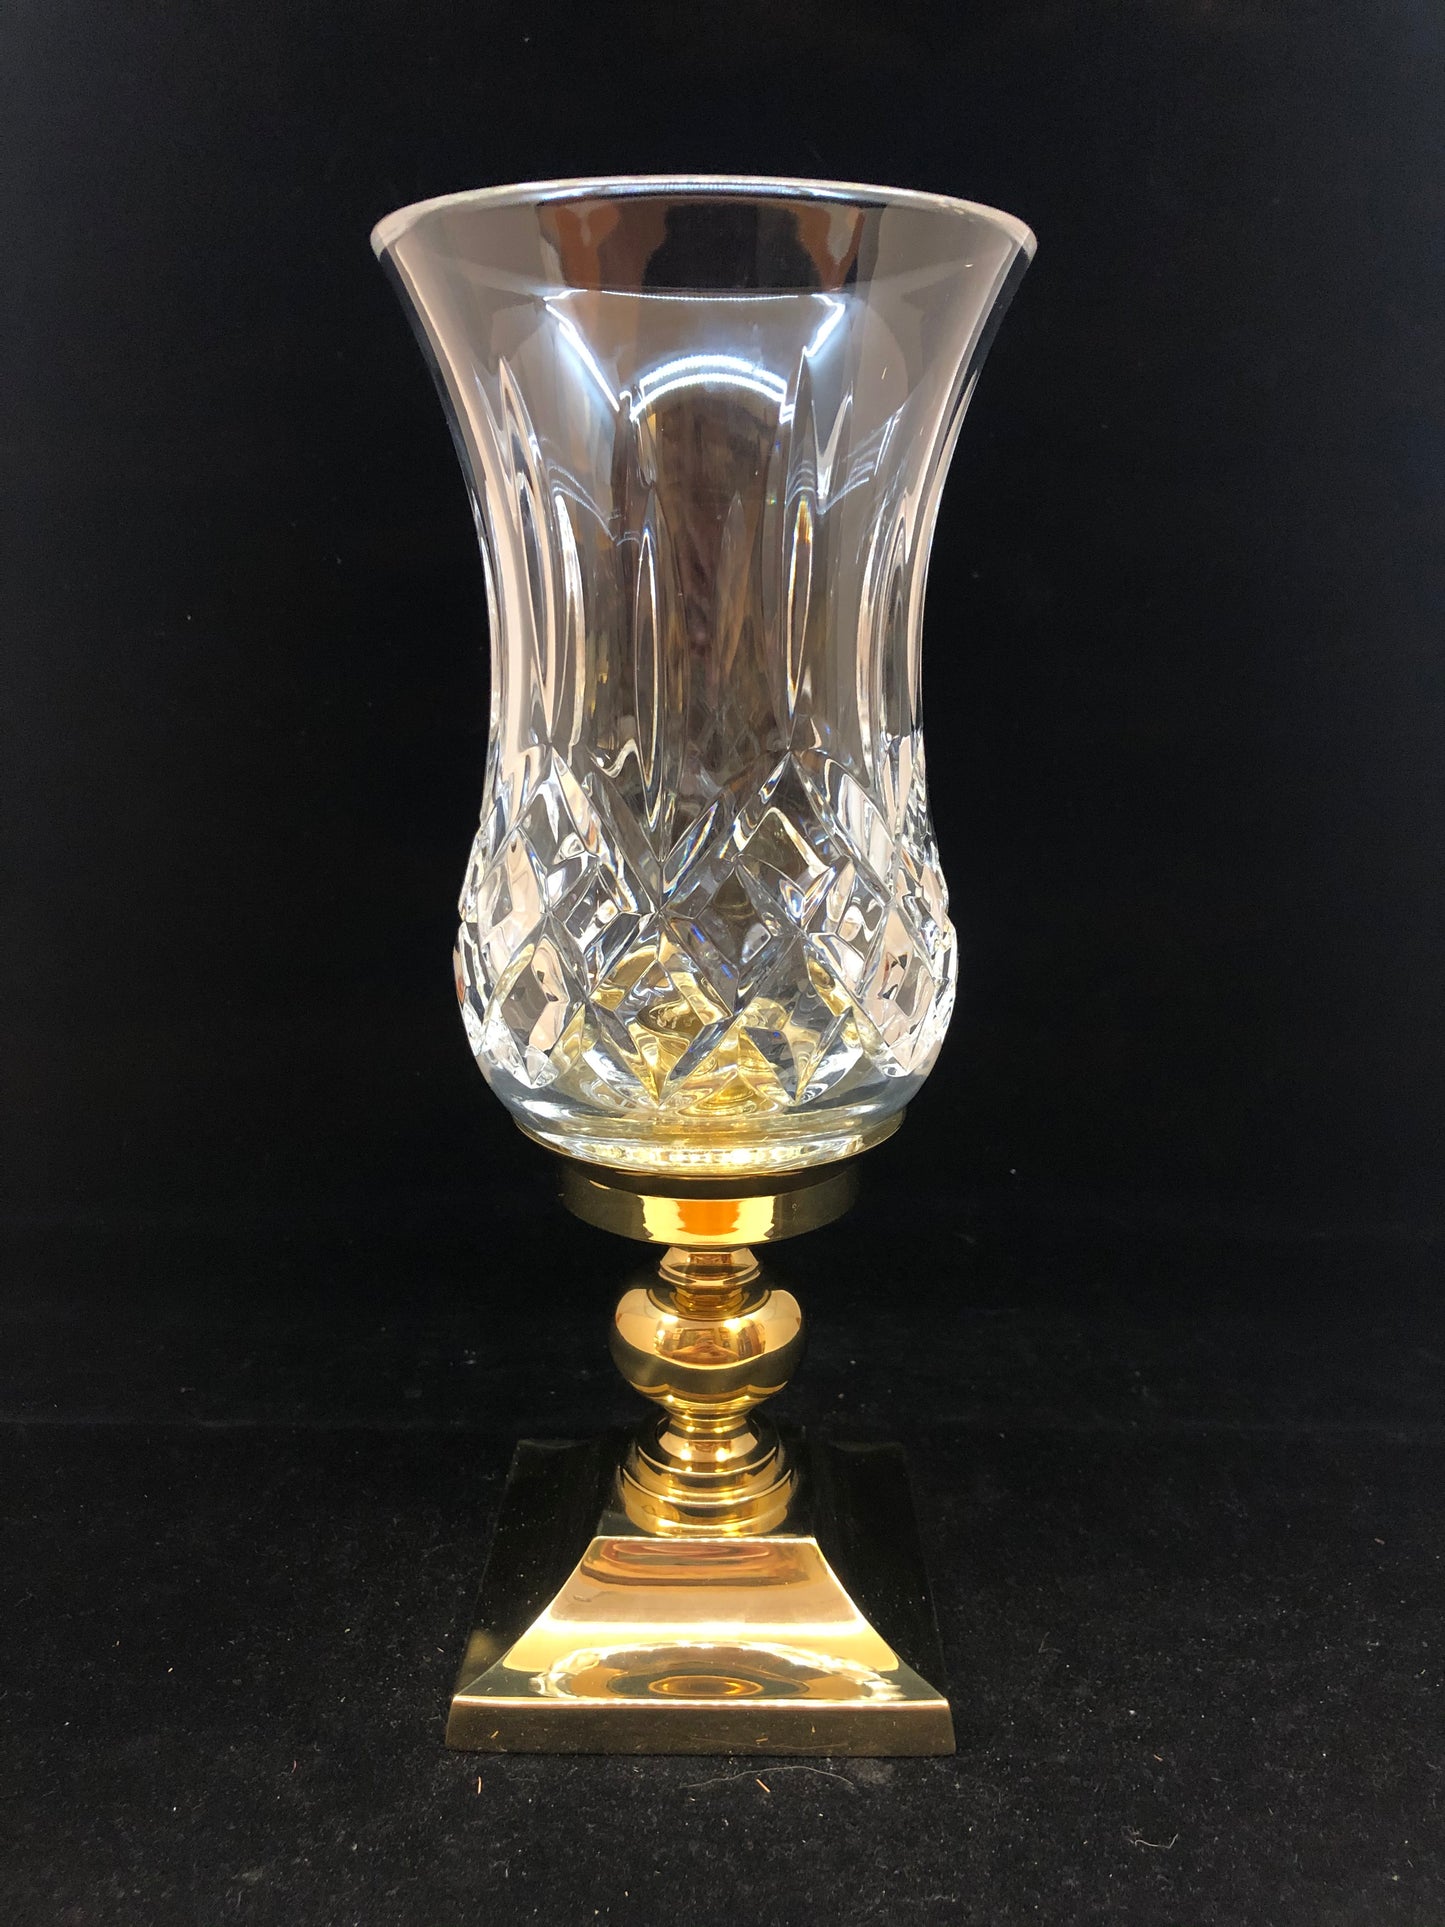 Waterford Crystal "Andover" Hurricane